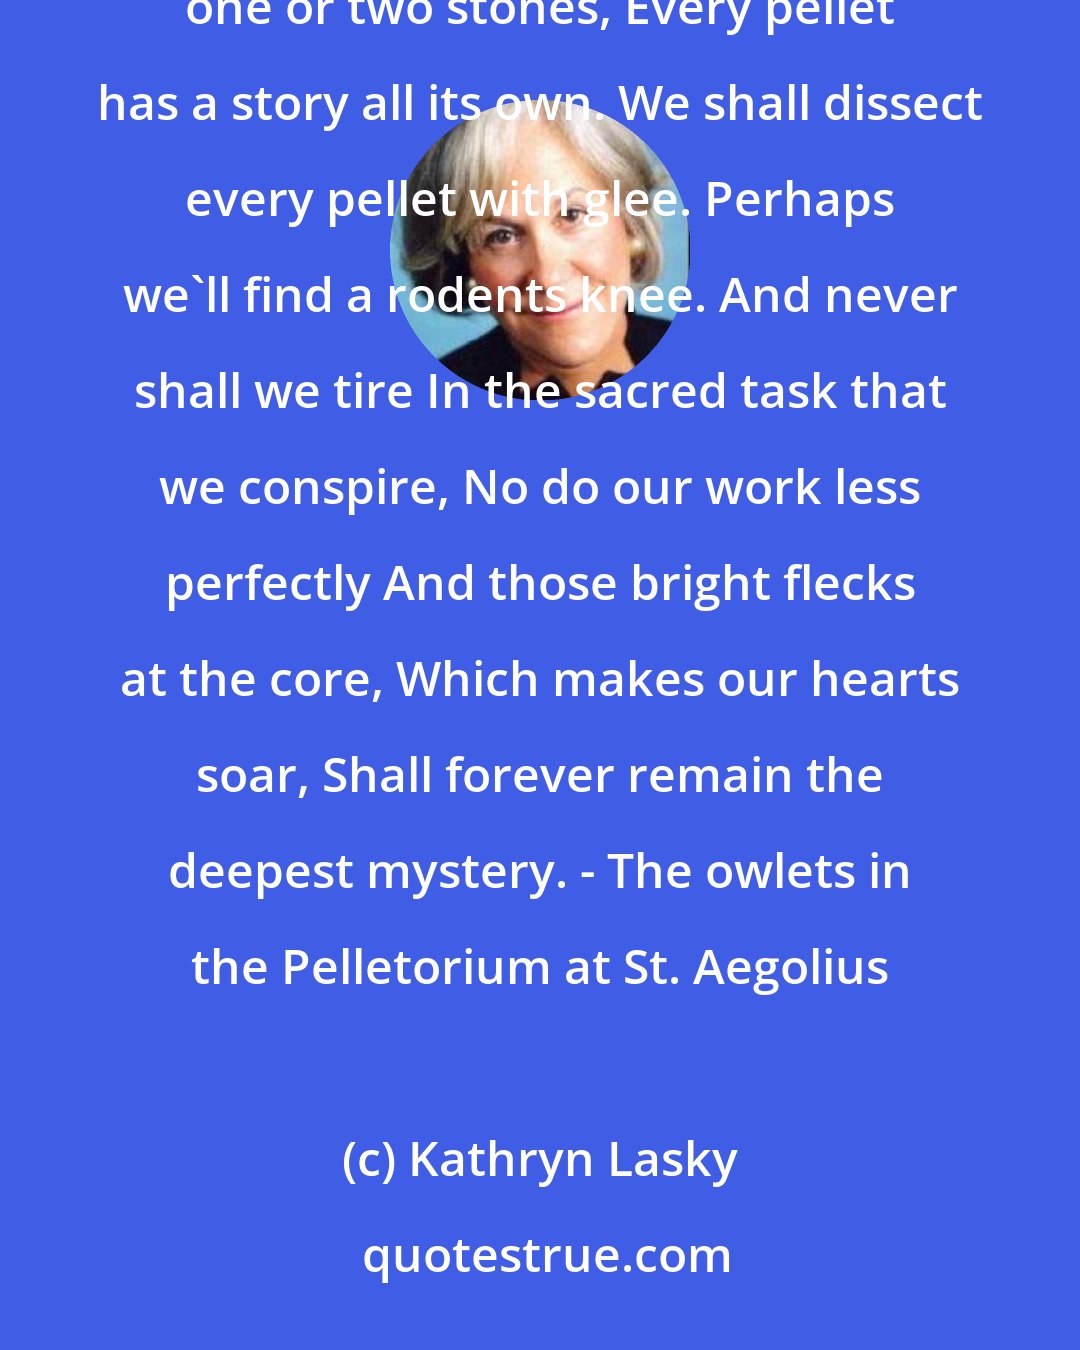 Kathryn Lasky: Every pellet has a story all its own. Every pellet has a story all its own. With its fur and teeth and bones And one or two stones, Every pellet has a story all its own. We shall dissect every pellet with glee. Perhaps we'll find a rodents knee. And never shall we tire In the sacred task that we conspire, No do our work less perfectly And those bright flecks at the core, Which makes our hearts soar, Shall forever remain the deepest mystery. - The owlets in the Pelletorium at St. Aegolius